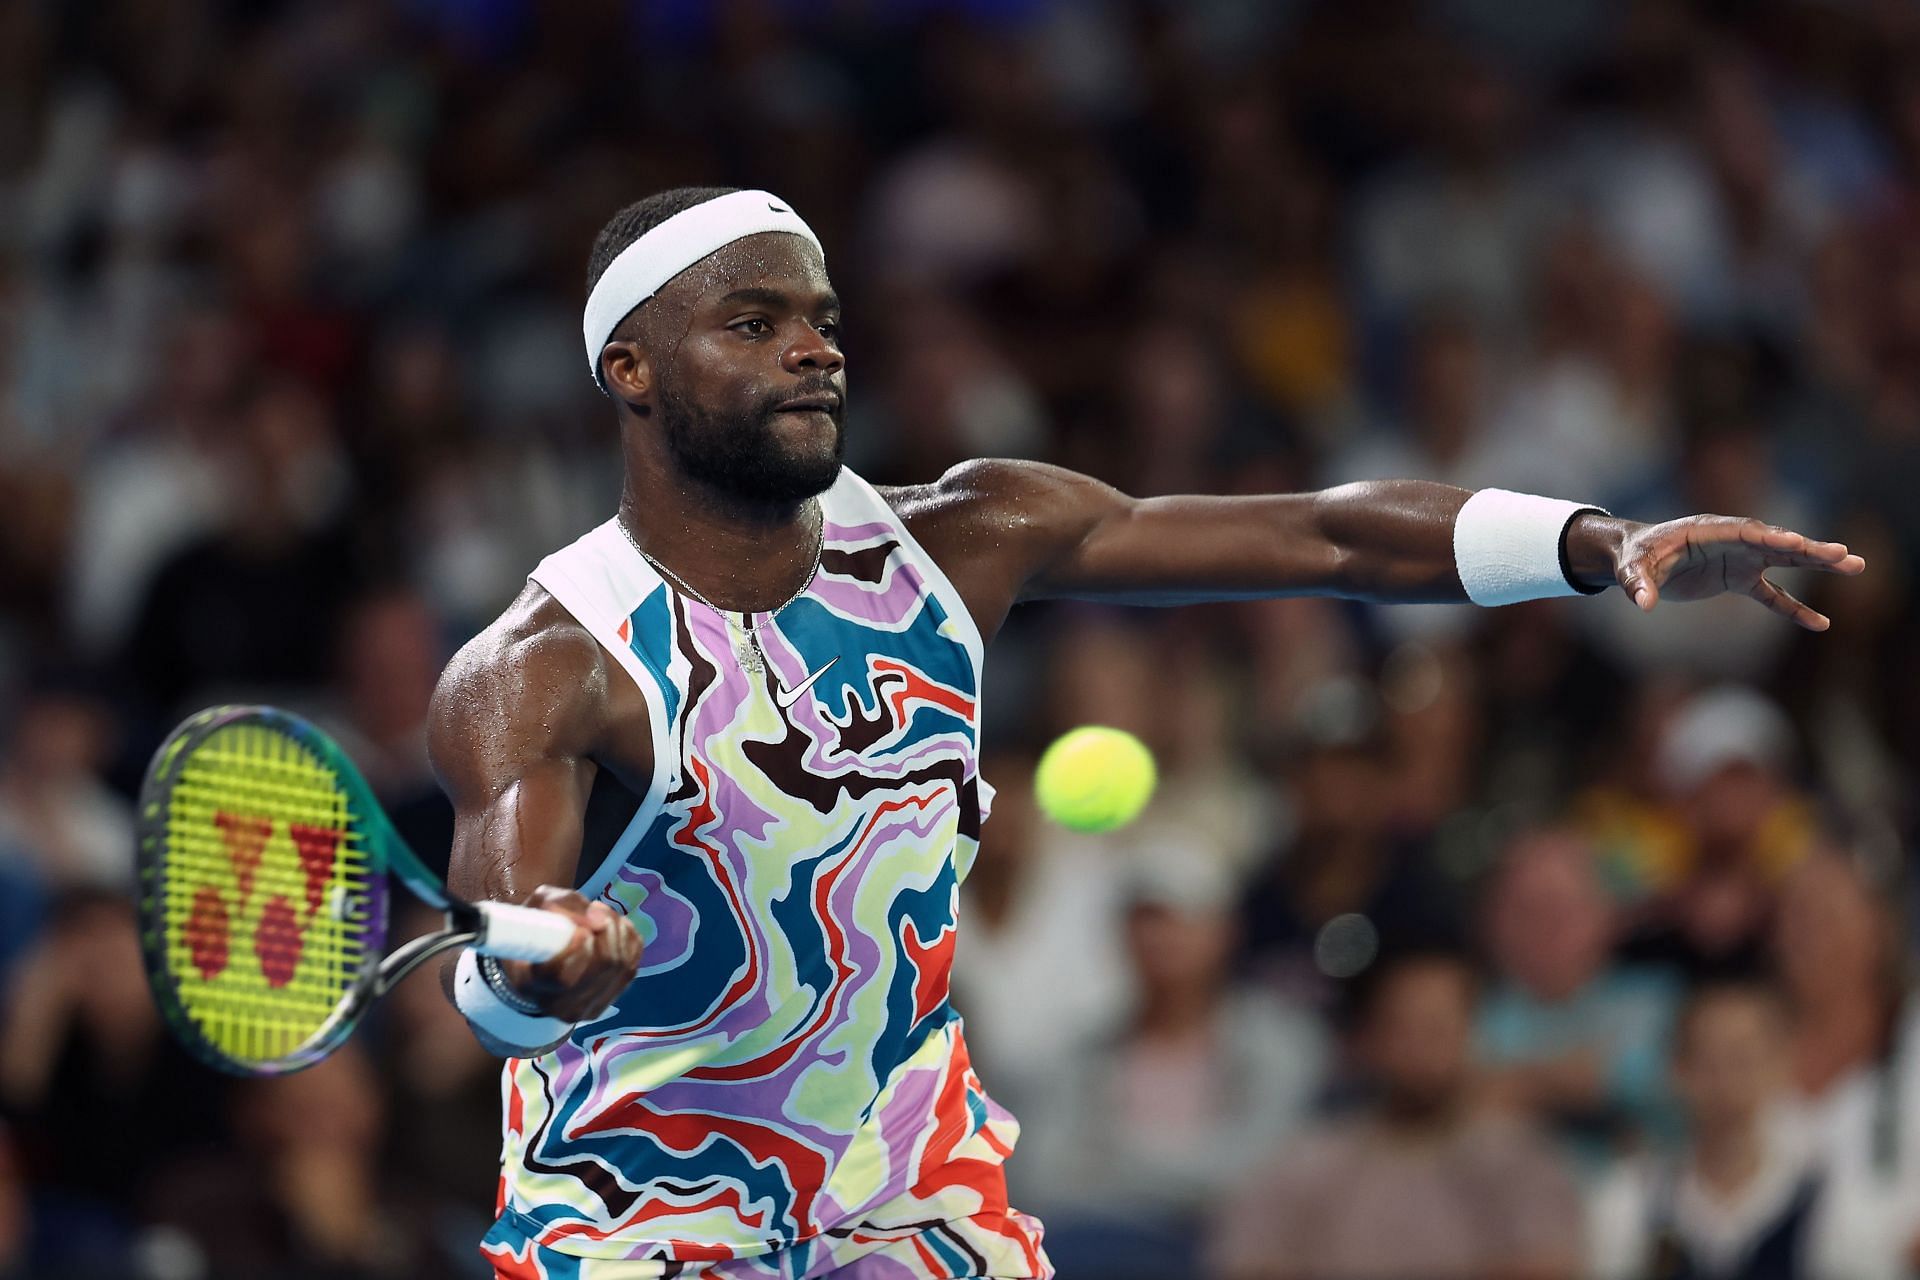 Frances Tiafoe faces compatriot Mackenzie McDonald in the Round of 16 at the Dallas Open.